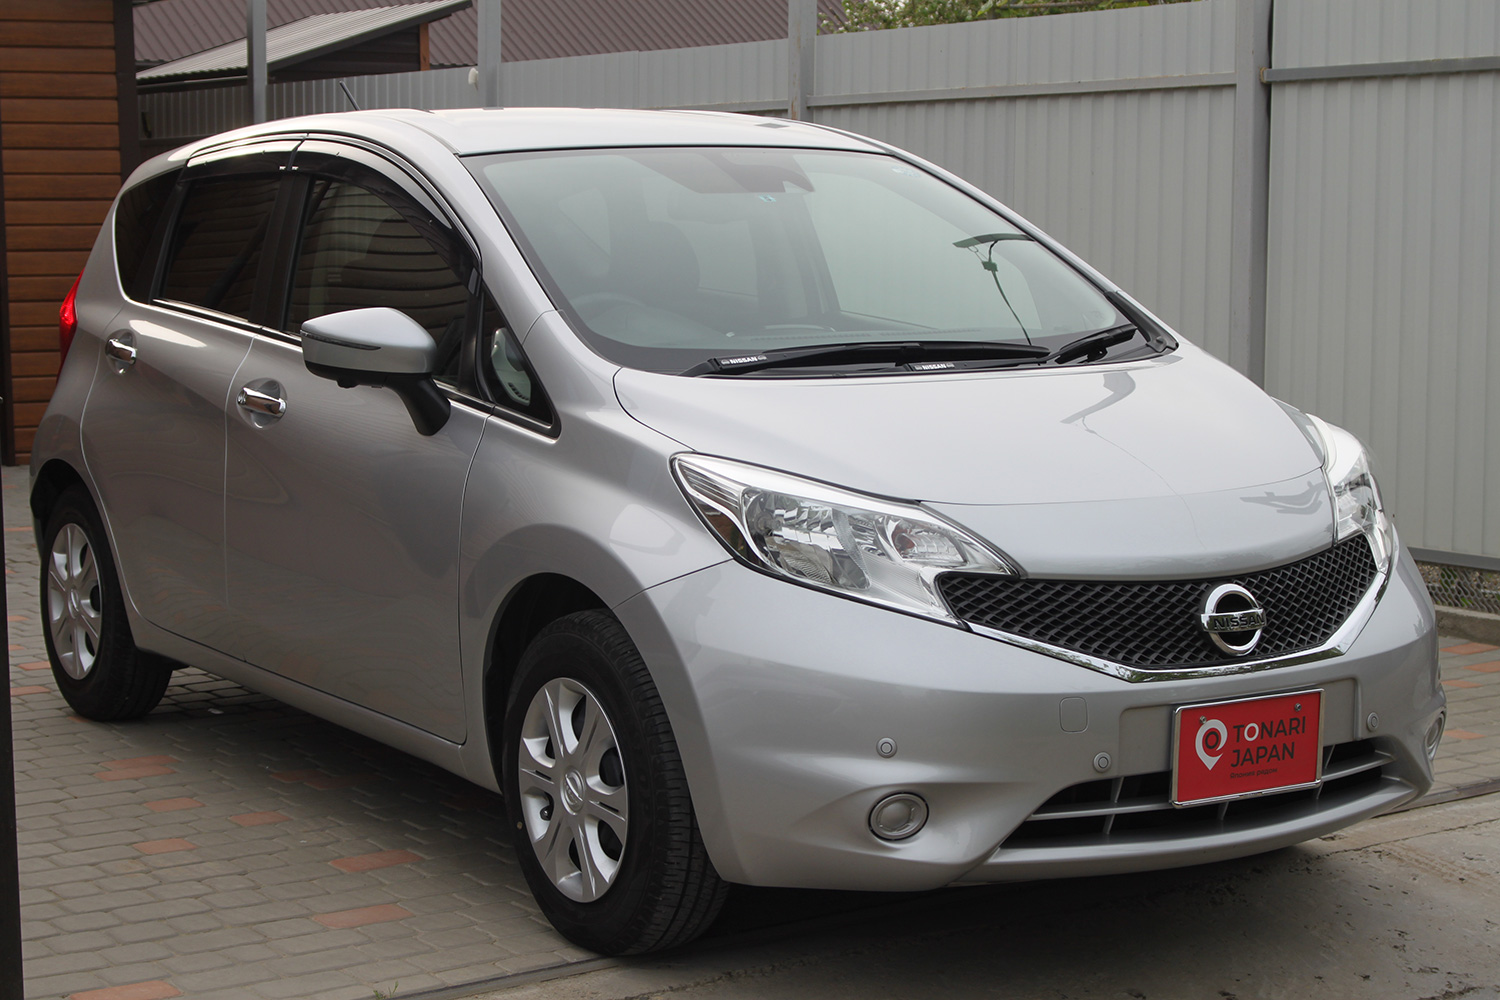 Nissan note 2015. Nissan Nite 2015. Ниссан ноут 2015 года. Nissan Note 2015г.